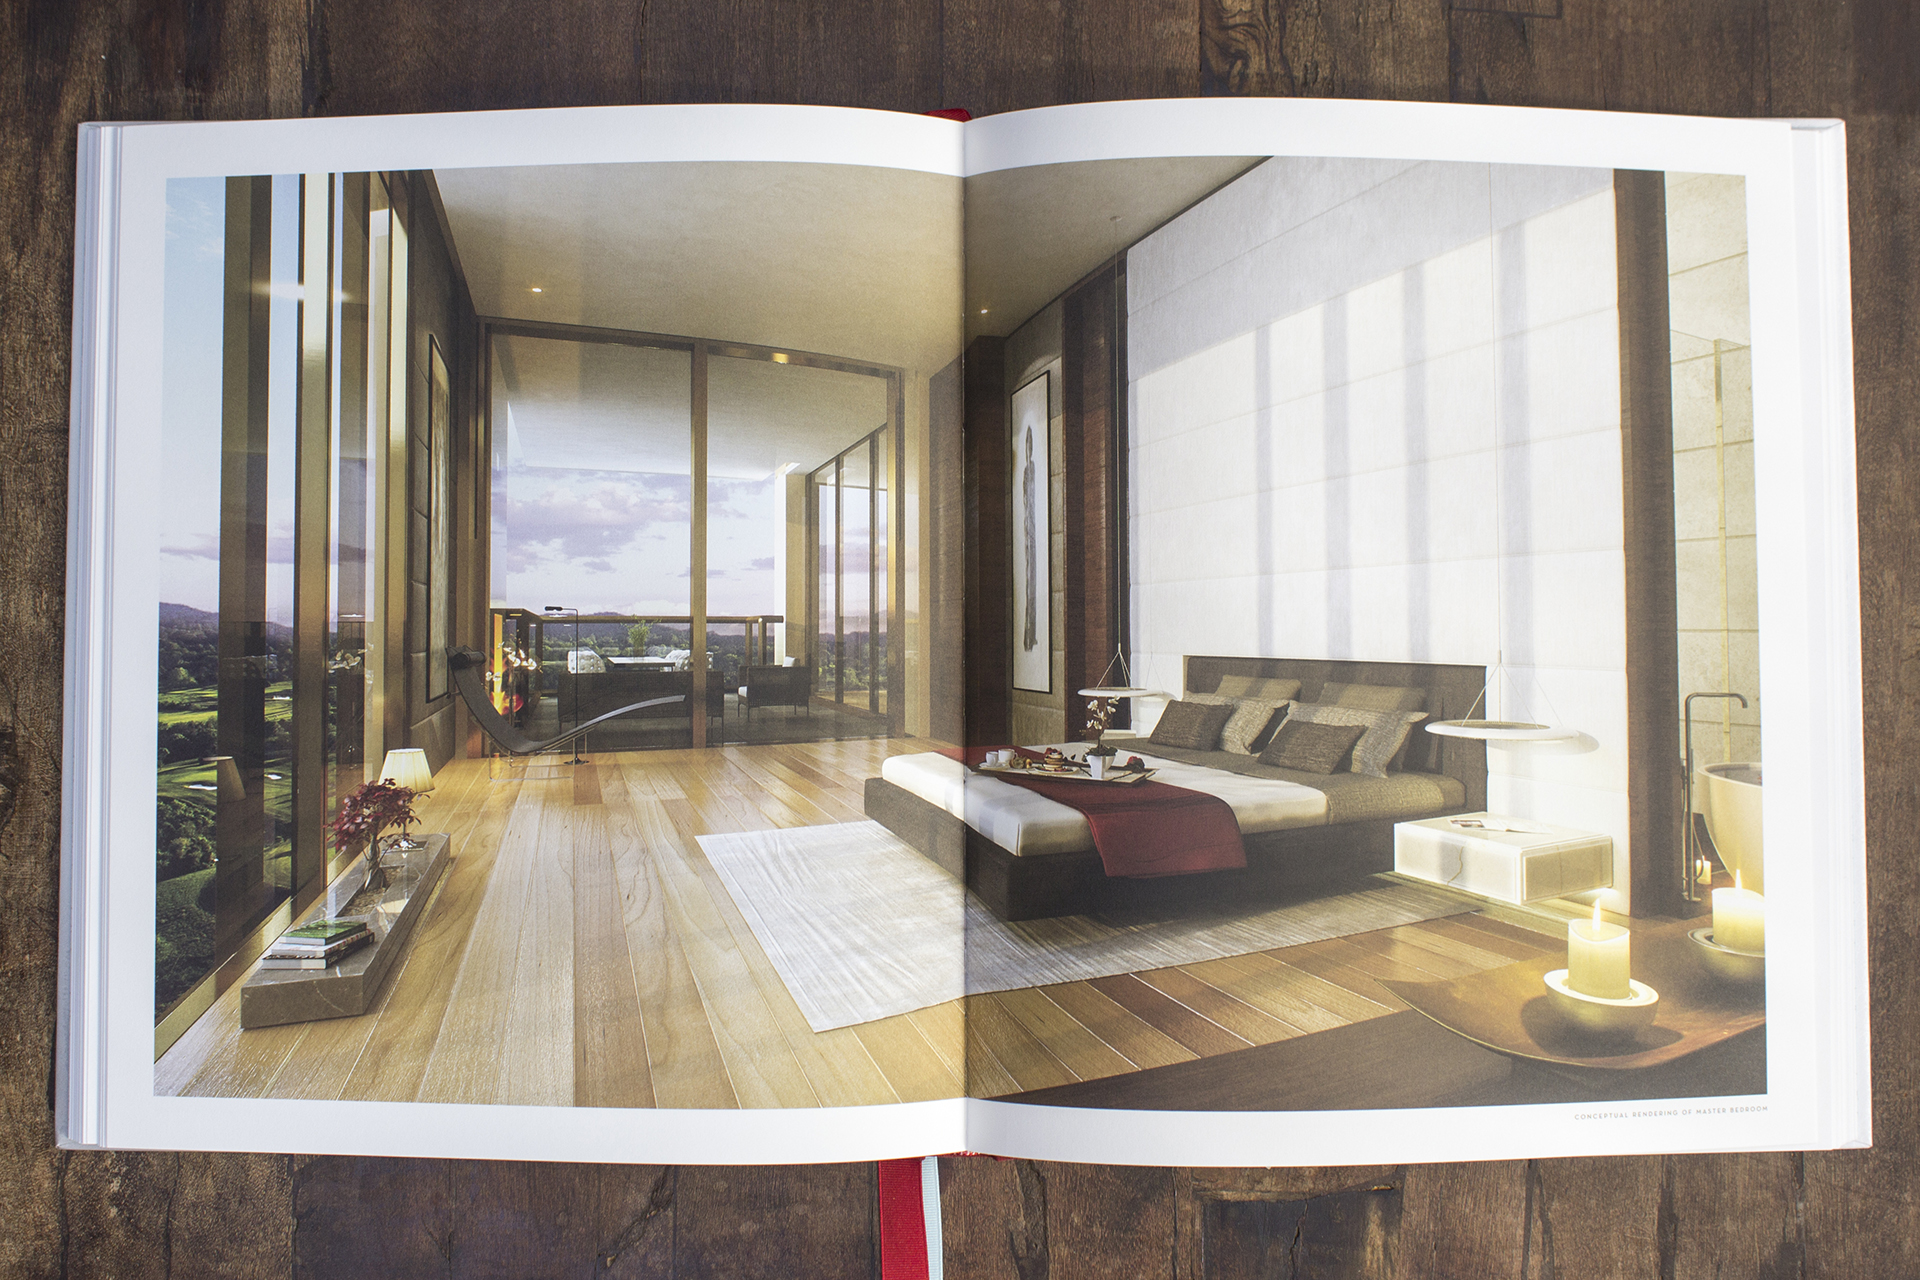 Two-page spread from Hyatt publication showing interior photography